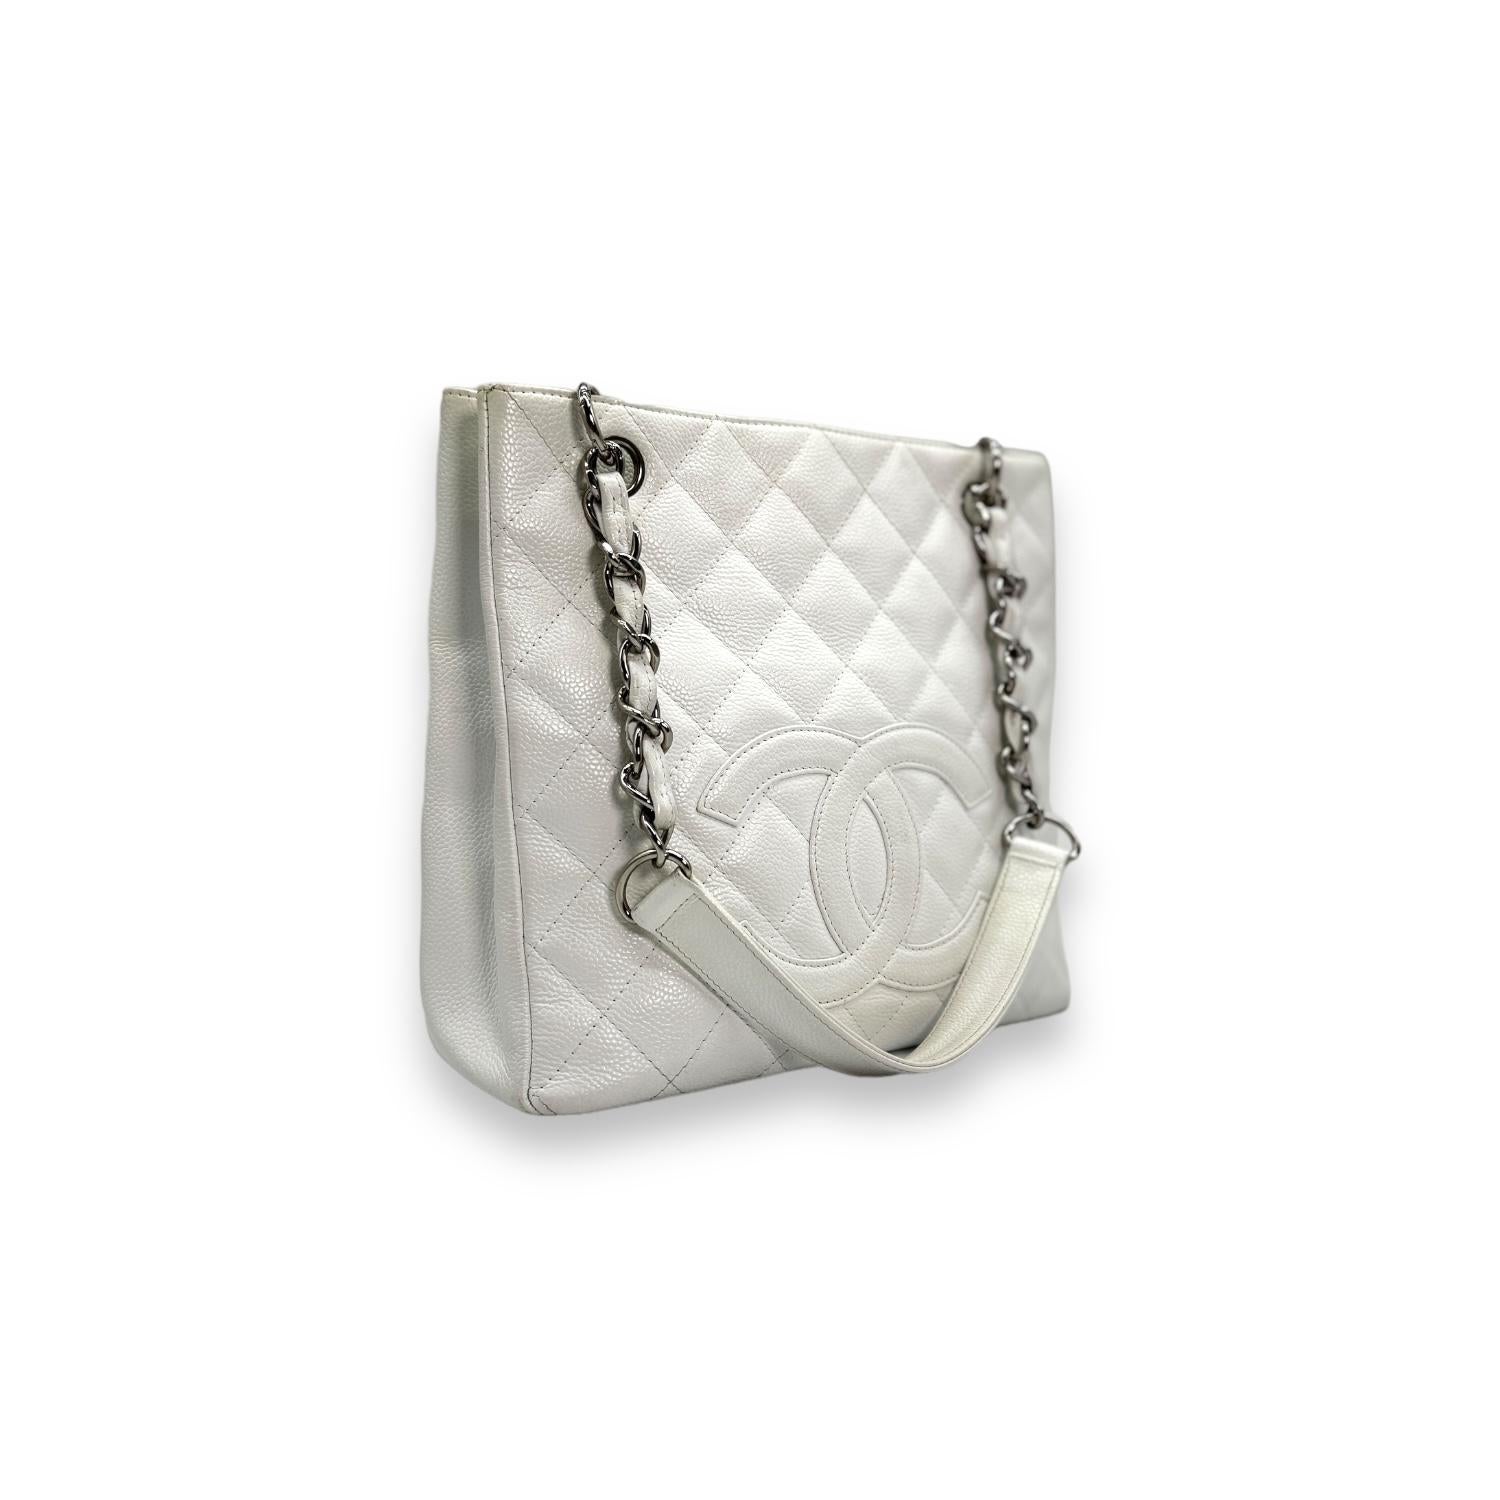 Chanel Vintage White Caviar Petite Shopping Tote PST In Good Condition For Sale In Scottsdale, AZ